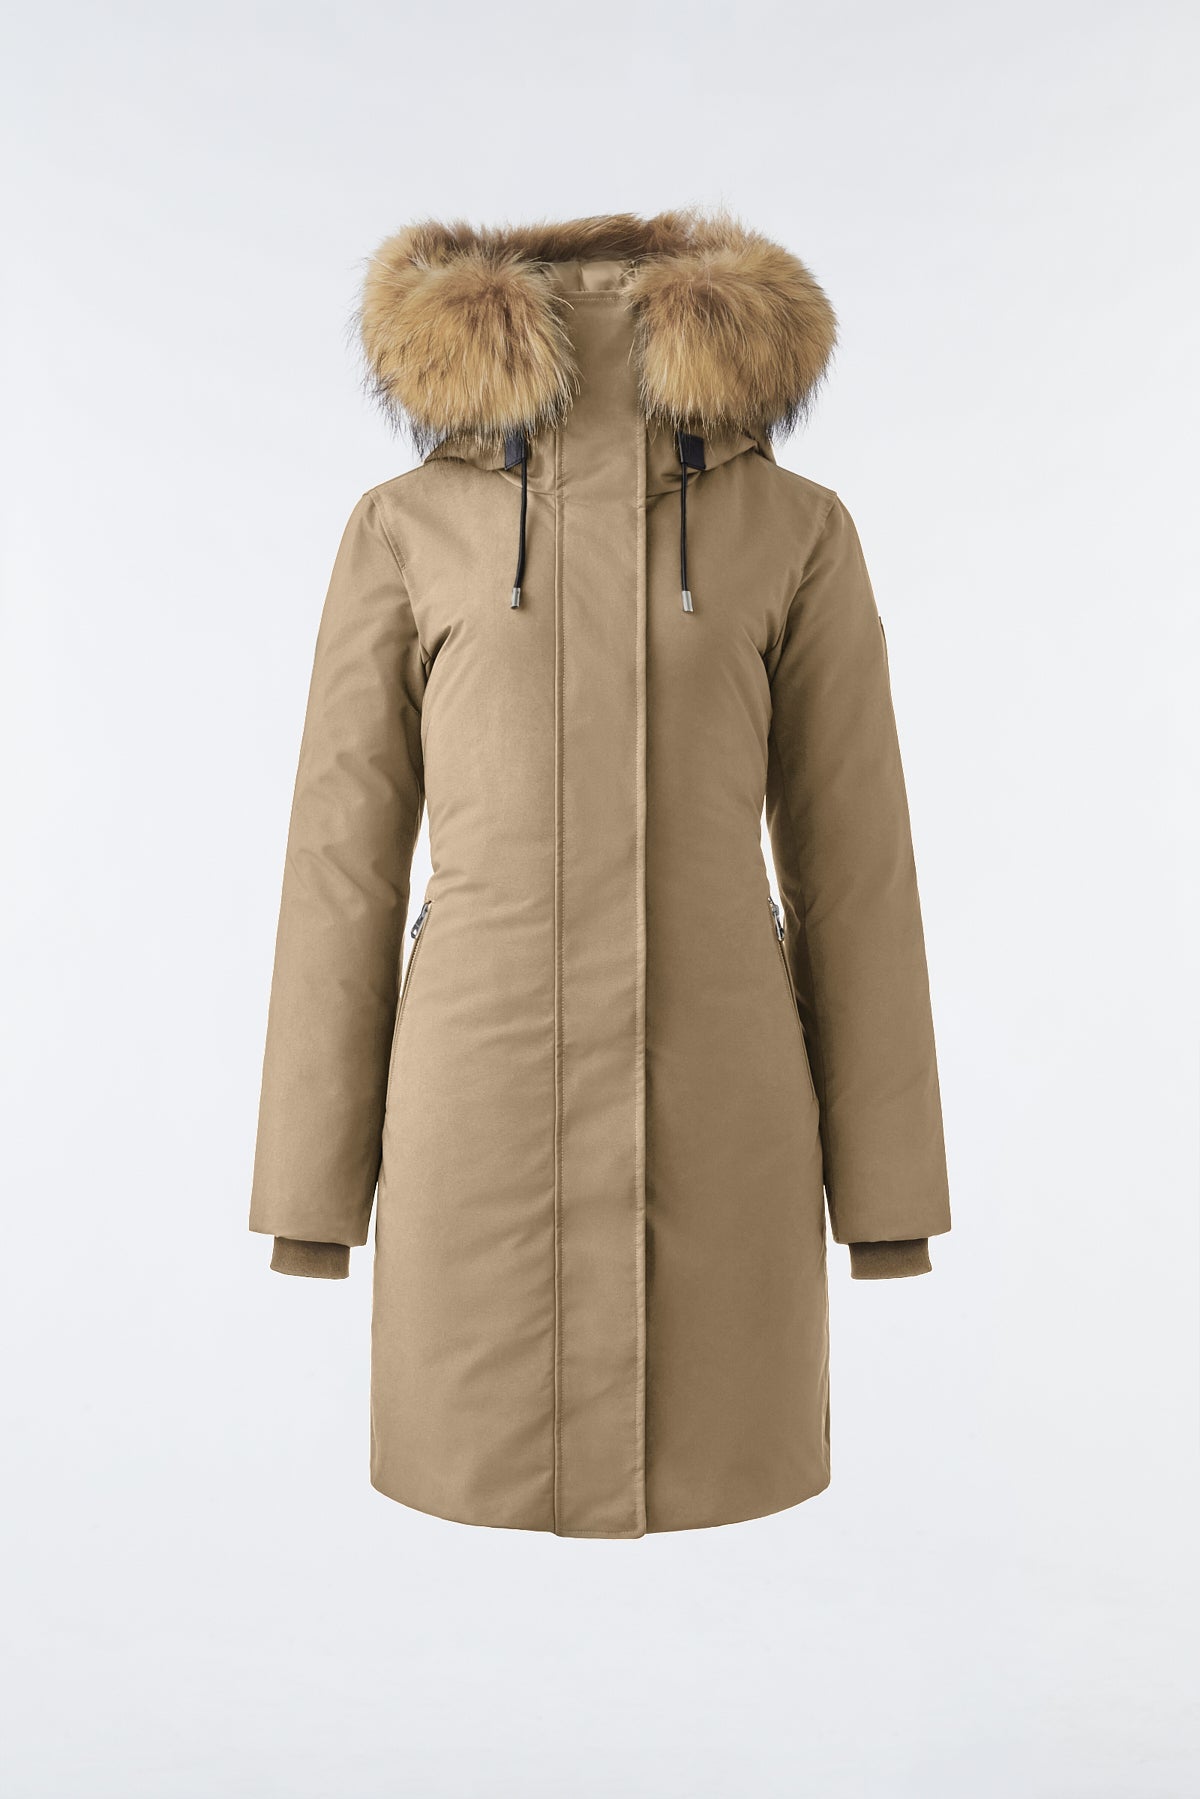 MACKAGE SHILOH-F-2-in-1-fitted-down-coat-with-bib-and-natural-fur - Boutique Bubbles